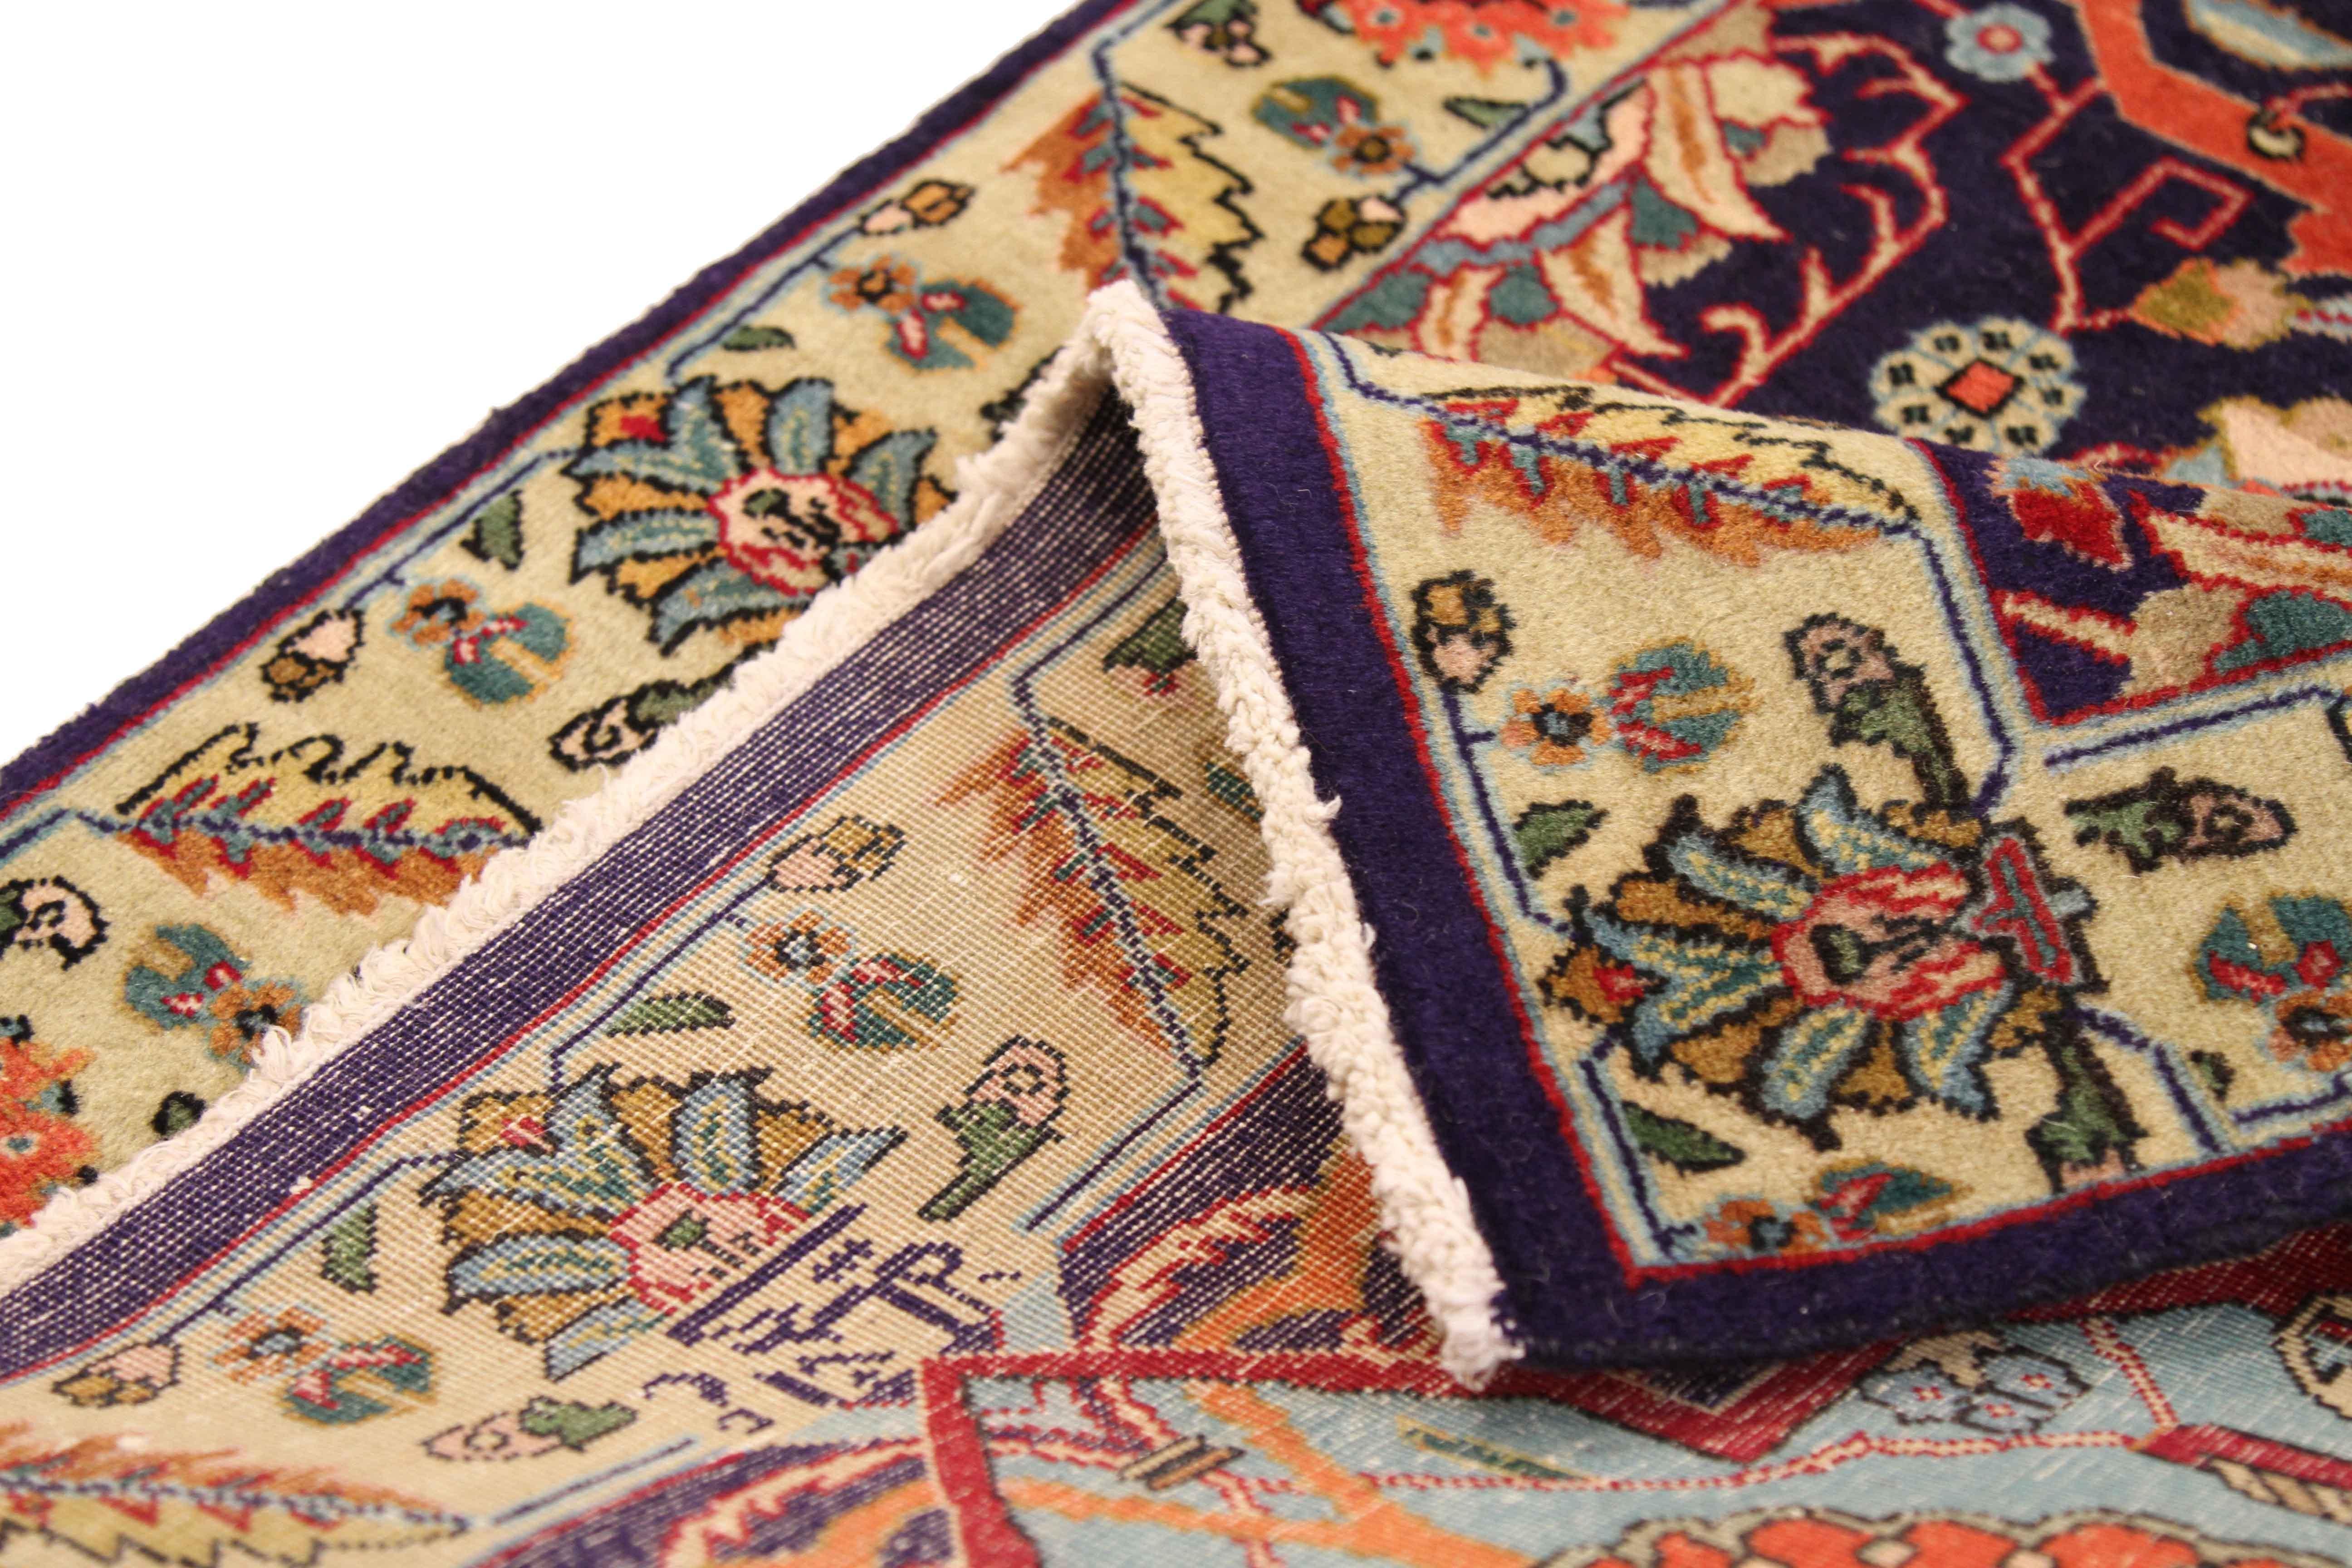 Antique Persian rug crafted with fine weaving technique showcasing the extraordinary details only found in Tabriz carpets. Blue, green, orange, navy, and ivory are blended seamlessly by intricate repeating floral patterns that make this area rug a